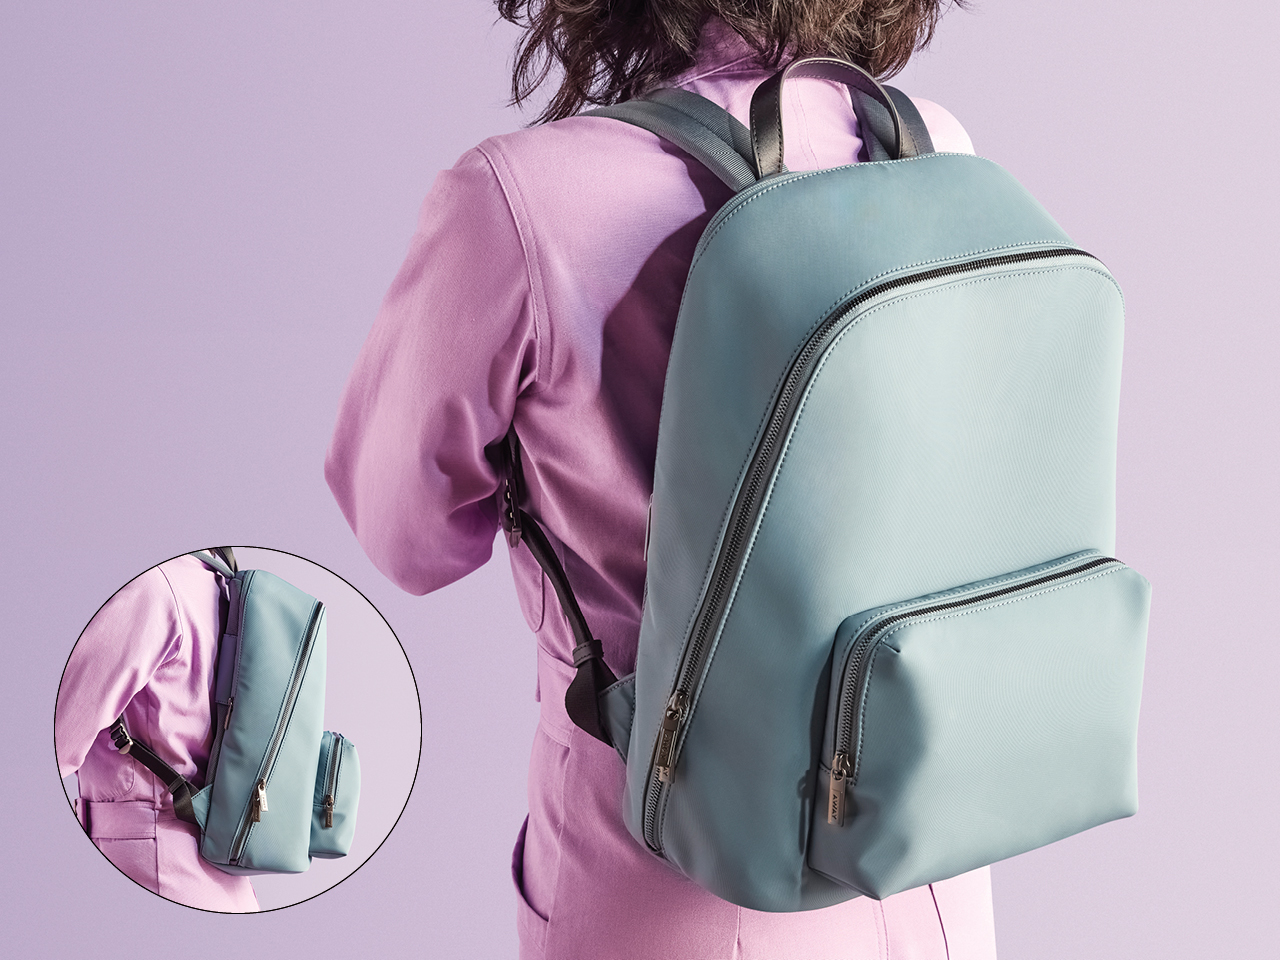 A photo of the back of a woman in a lilac jumpsuit wearing a light blue backpack